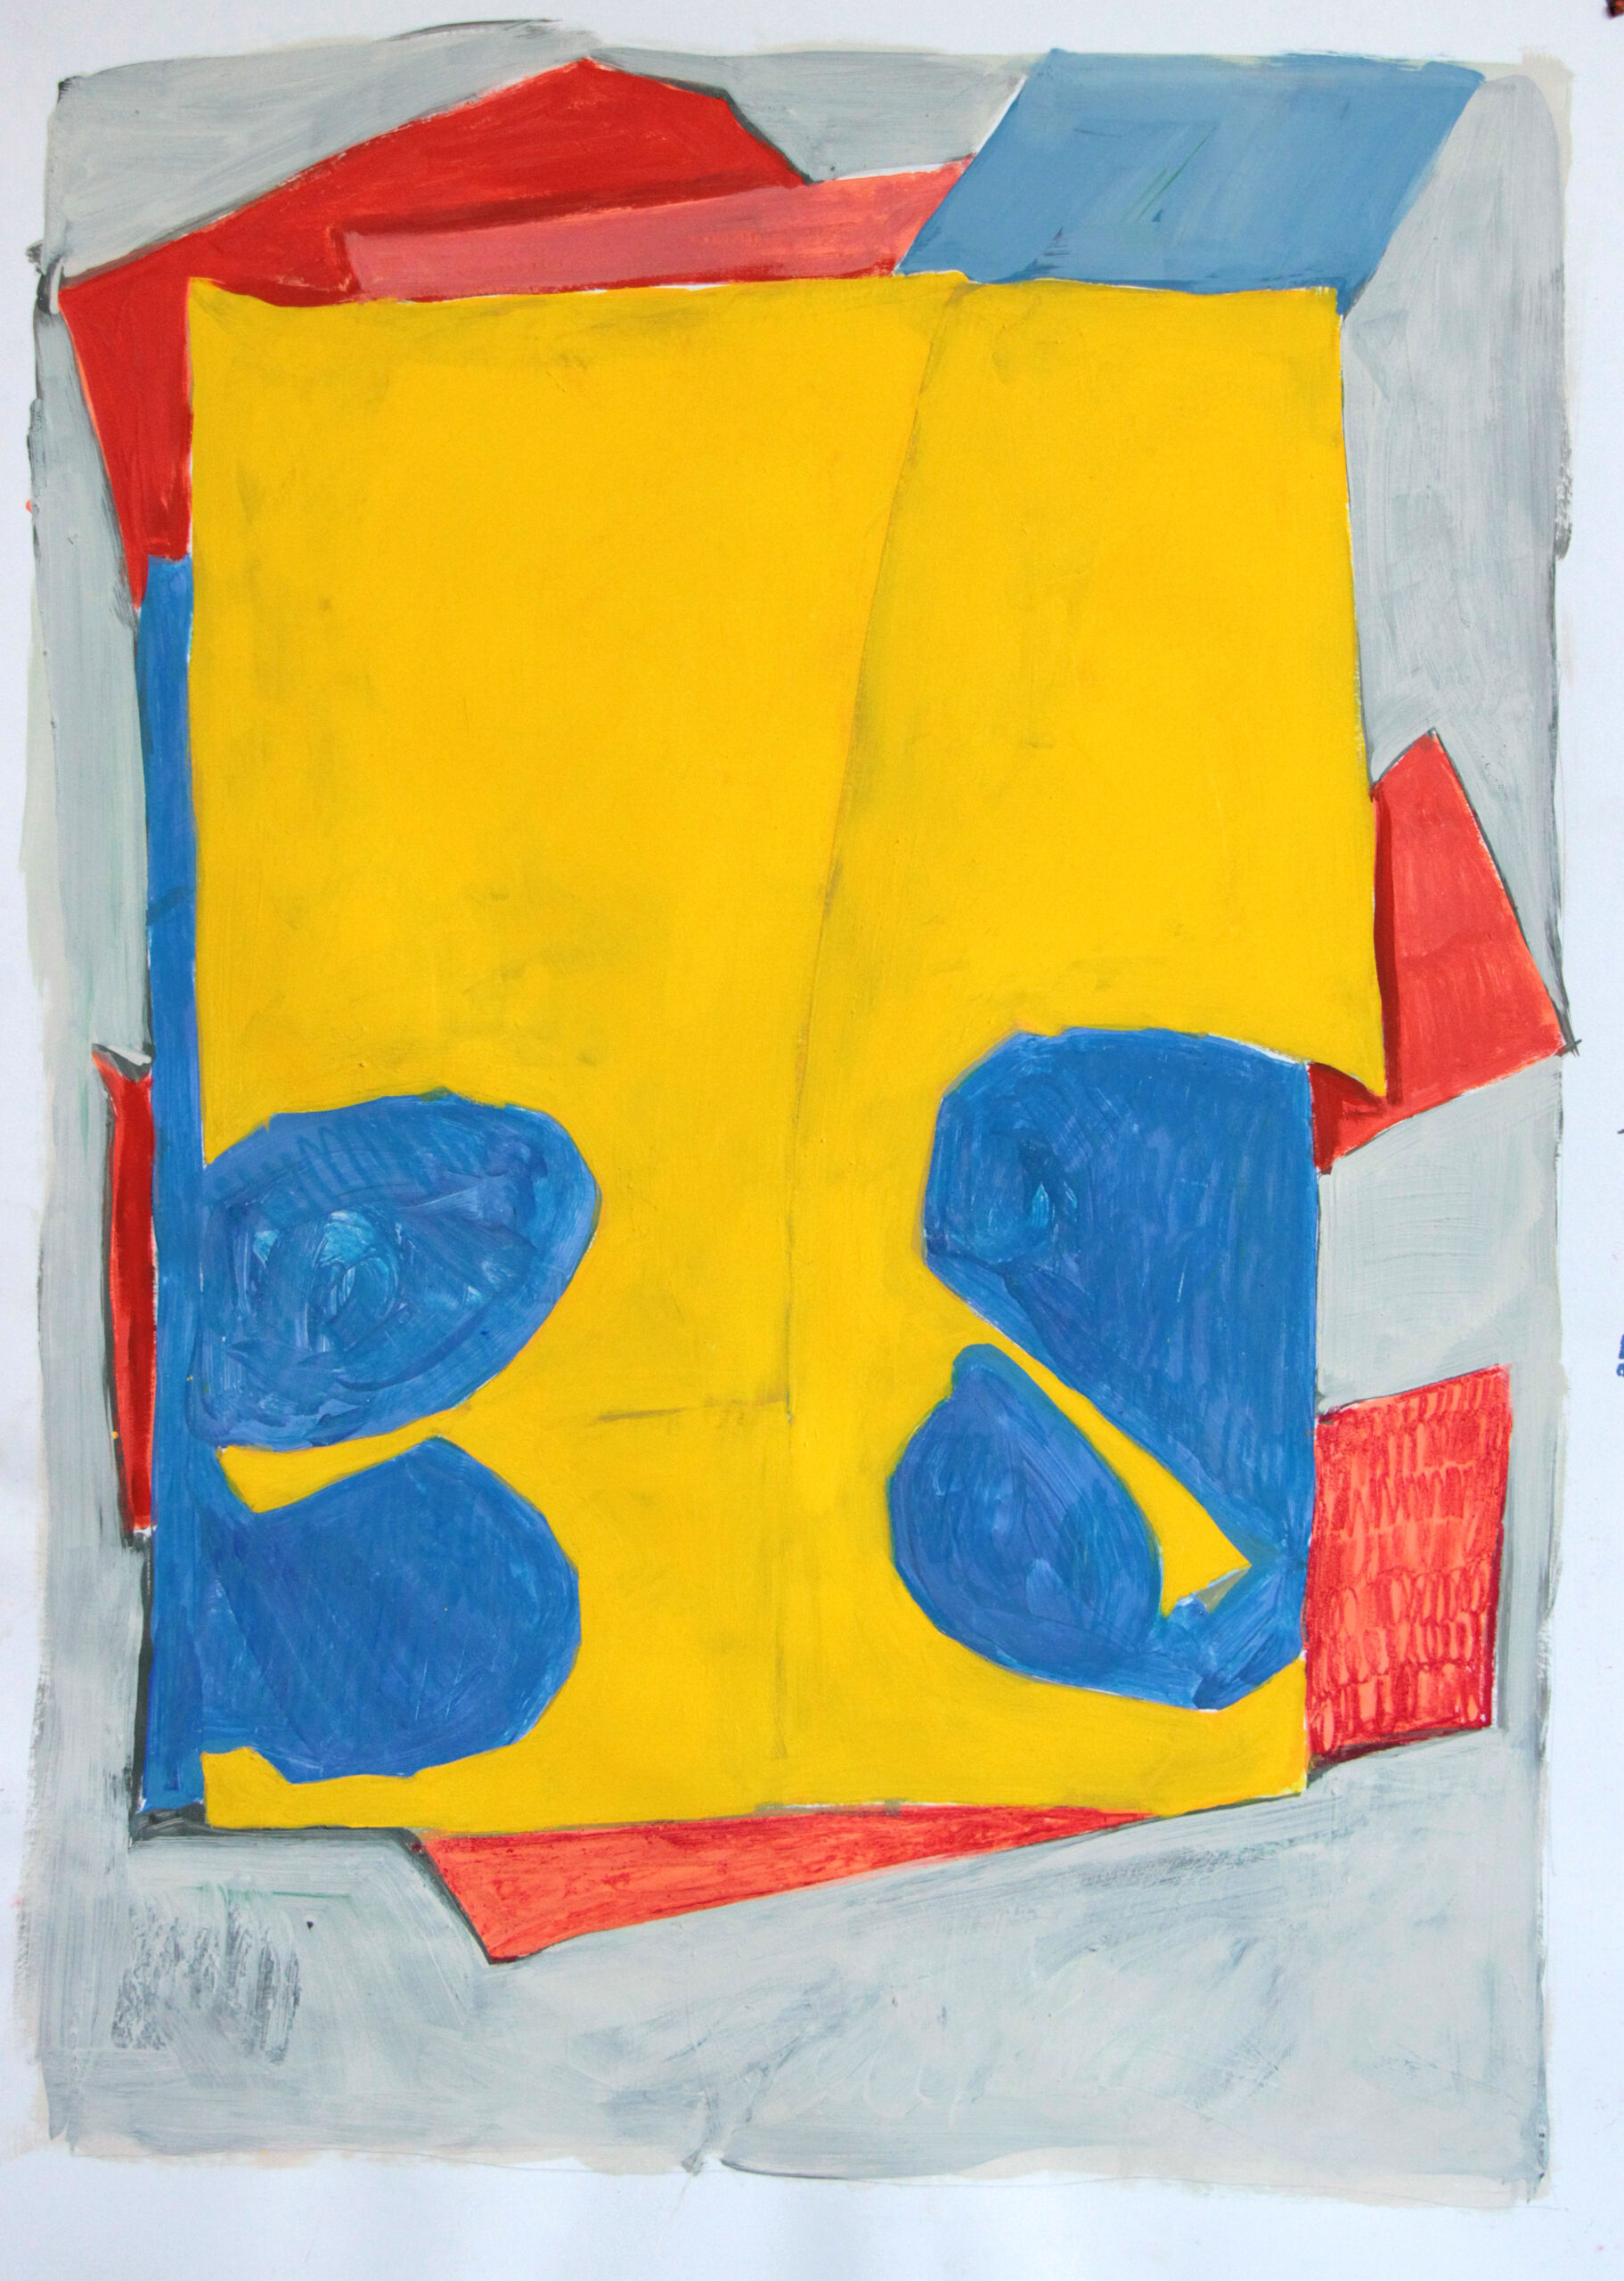 'The yellow one' From the cycle 'Cutouts', work on paper, egg tempera, crayon, 2021